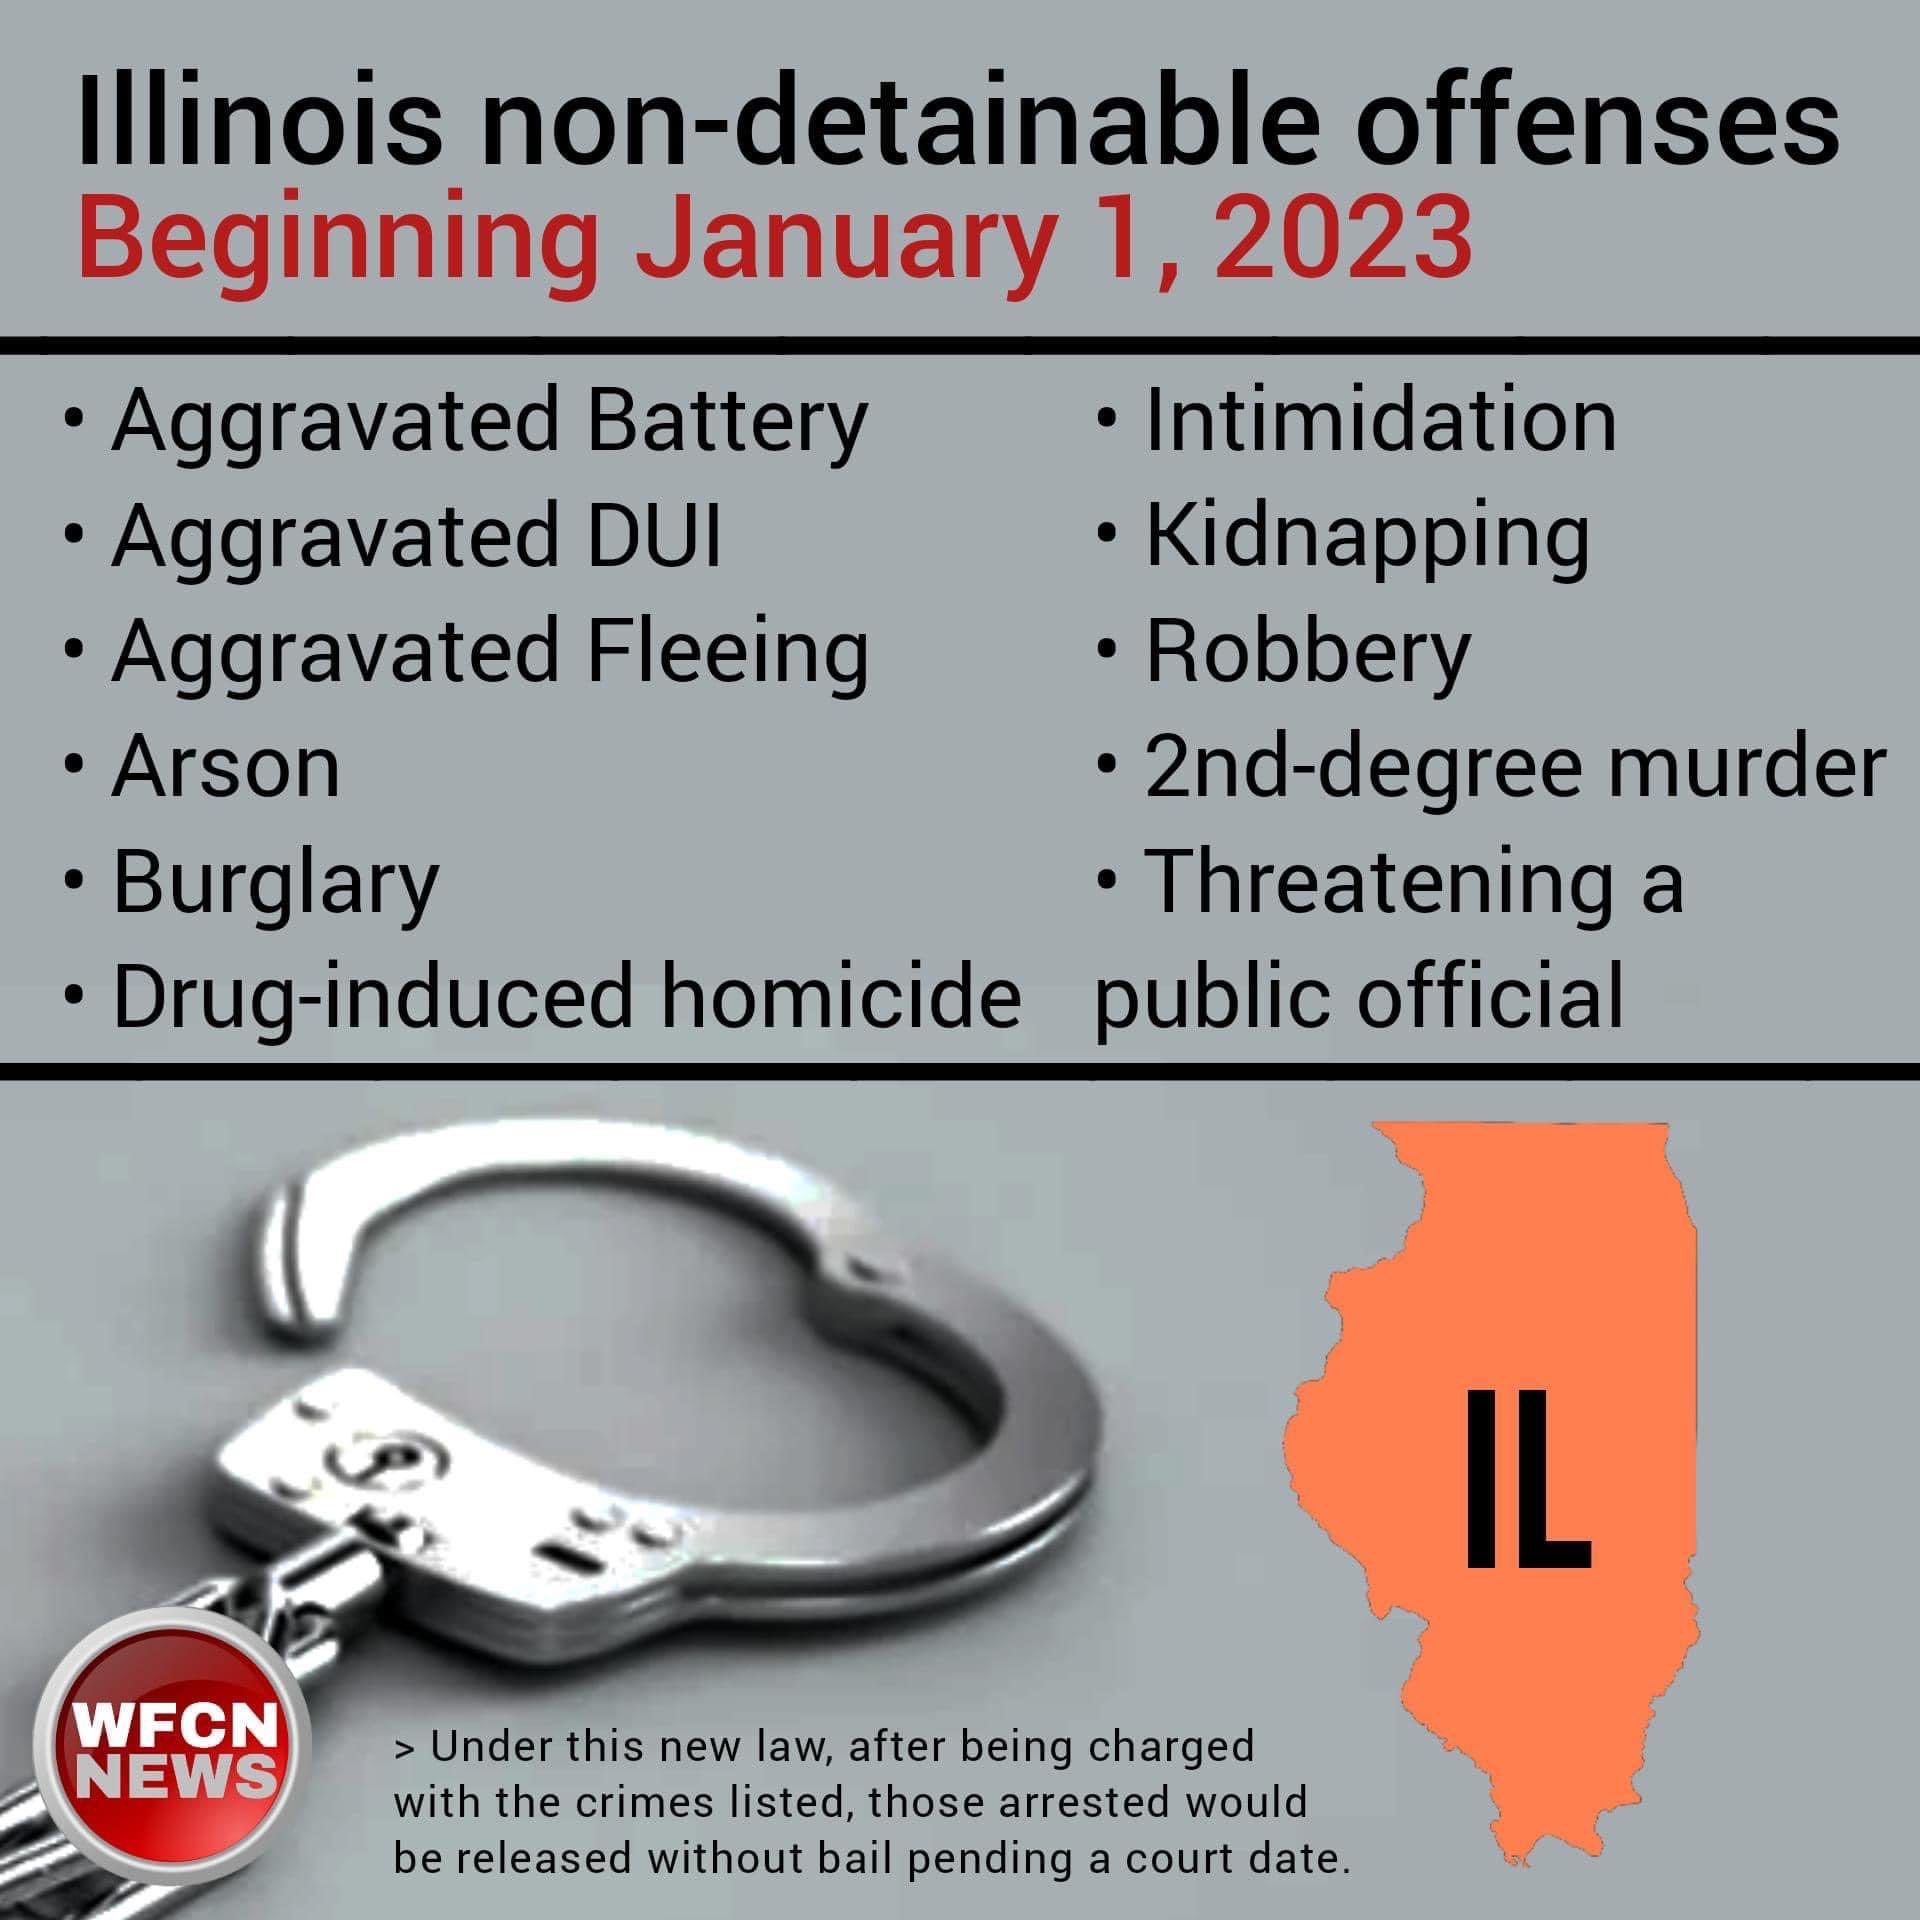 Infographic chart showing non-detainable offenses in Illinois beginning January 1, 2023: aggravated battery, aggravated dui, aggravated fleeing, arson, burglary, drug-induced homicide, intimidation, kidnapping, robbery, 2nd-degree murder, threatening a public official.